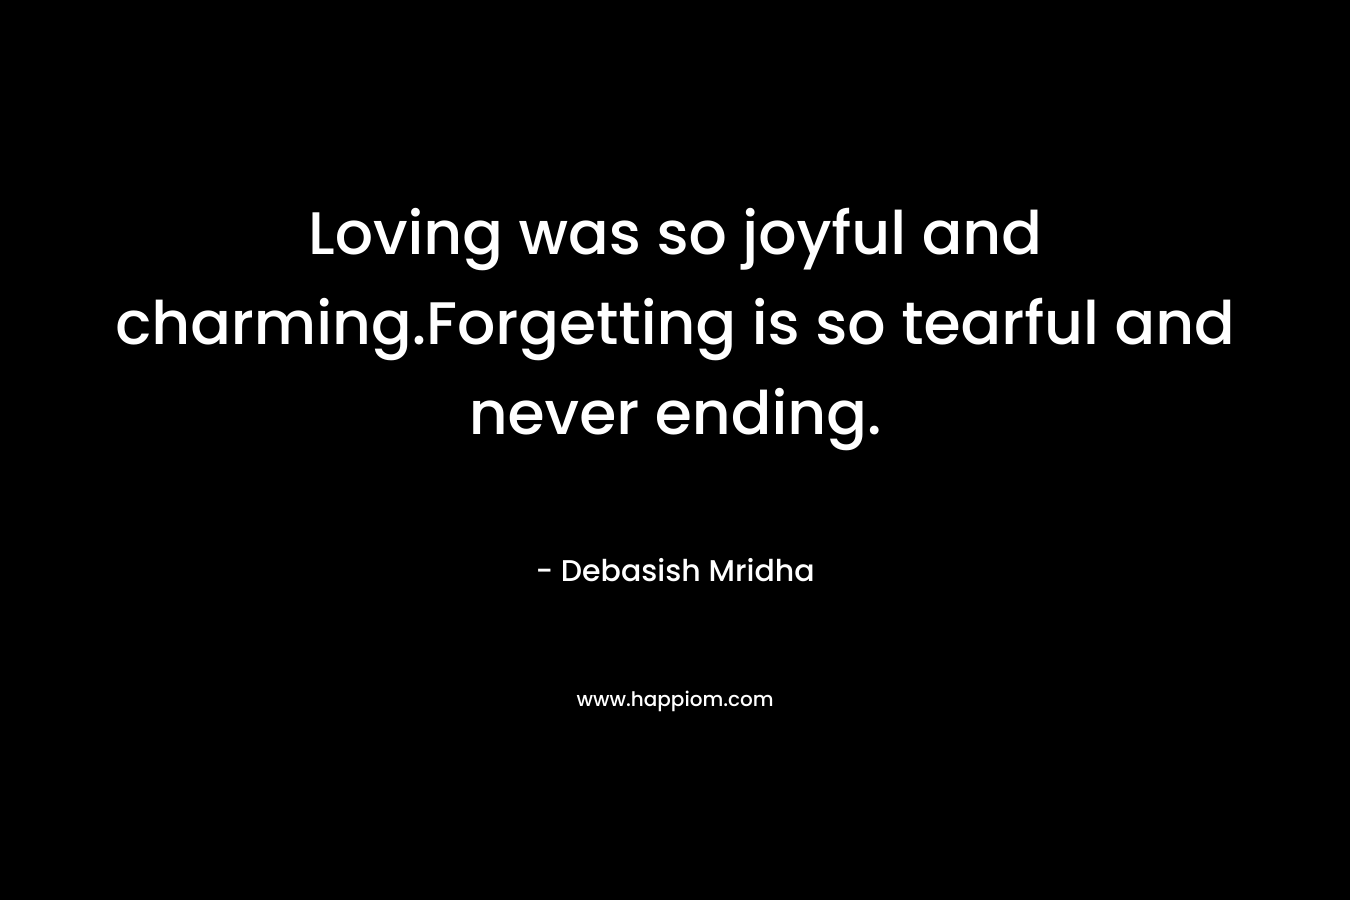 Loving was so joyful and charming.Forgetting is so tearful and never ending.